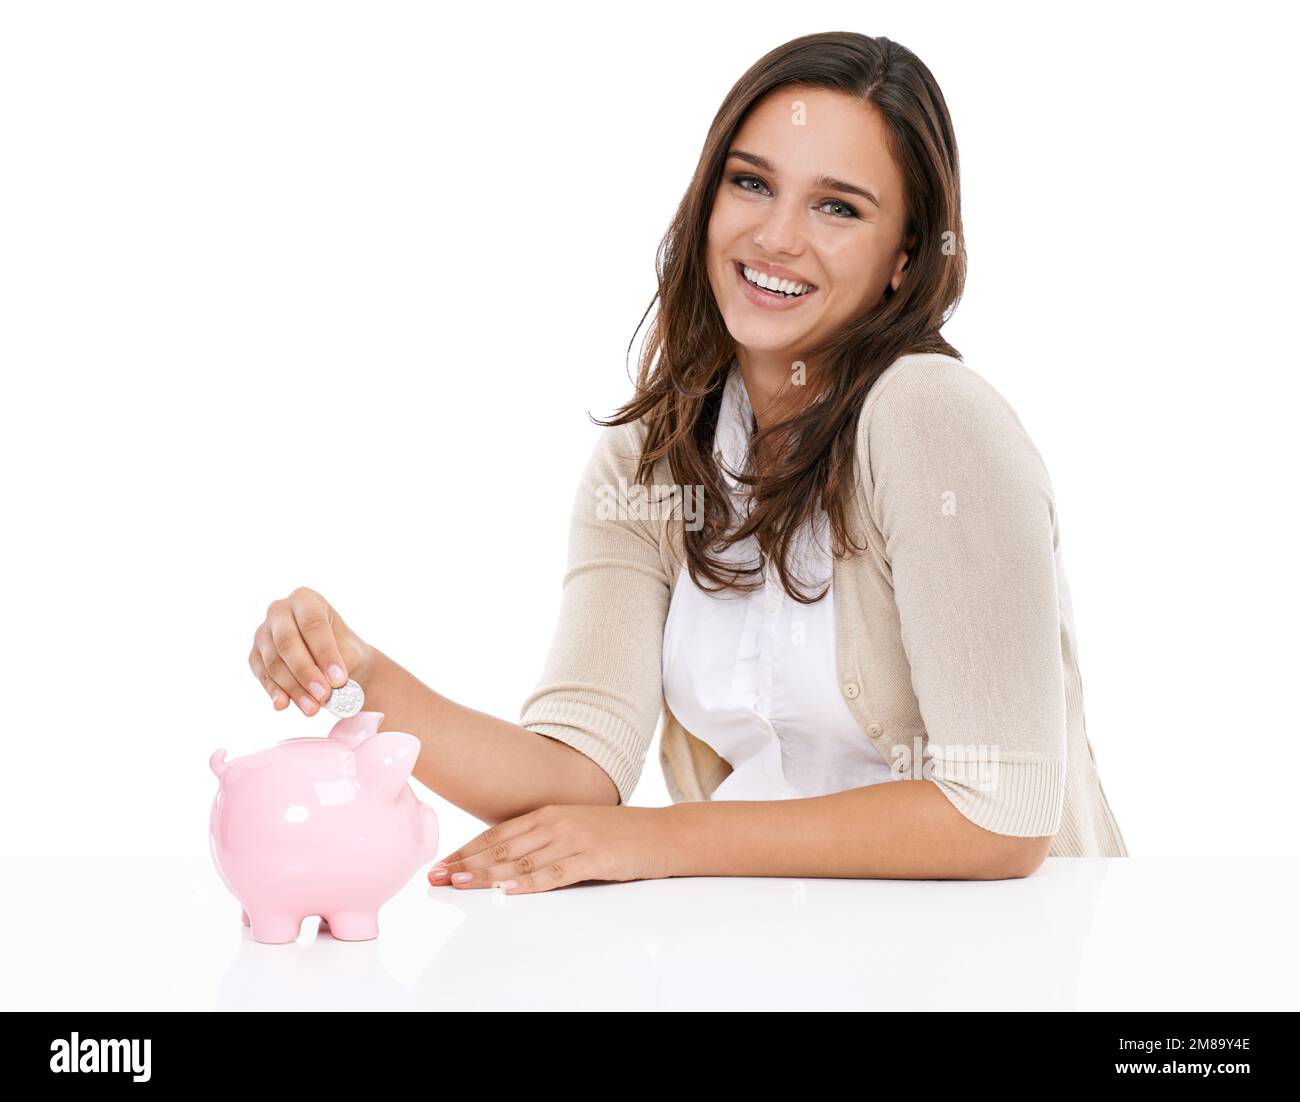 Money bank, savings and portrait of woman happy about saving, banking and investment for future. Female with a smile isolated on a white background Stock Photo